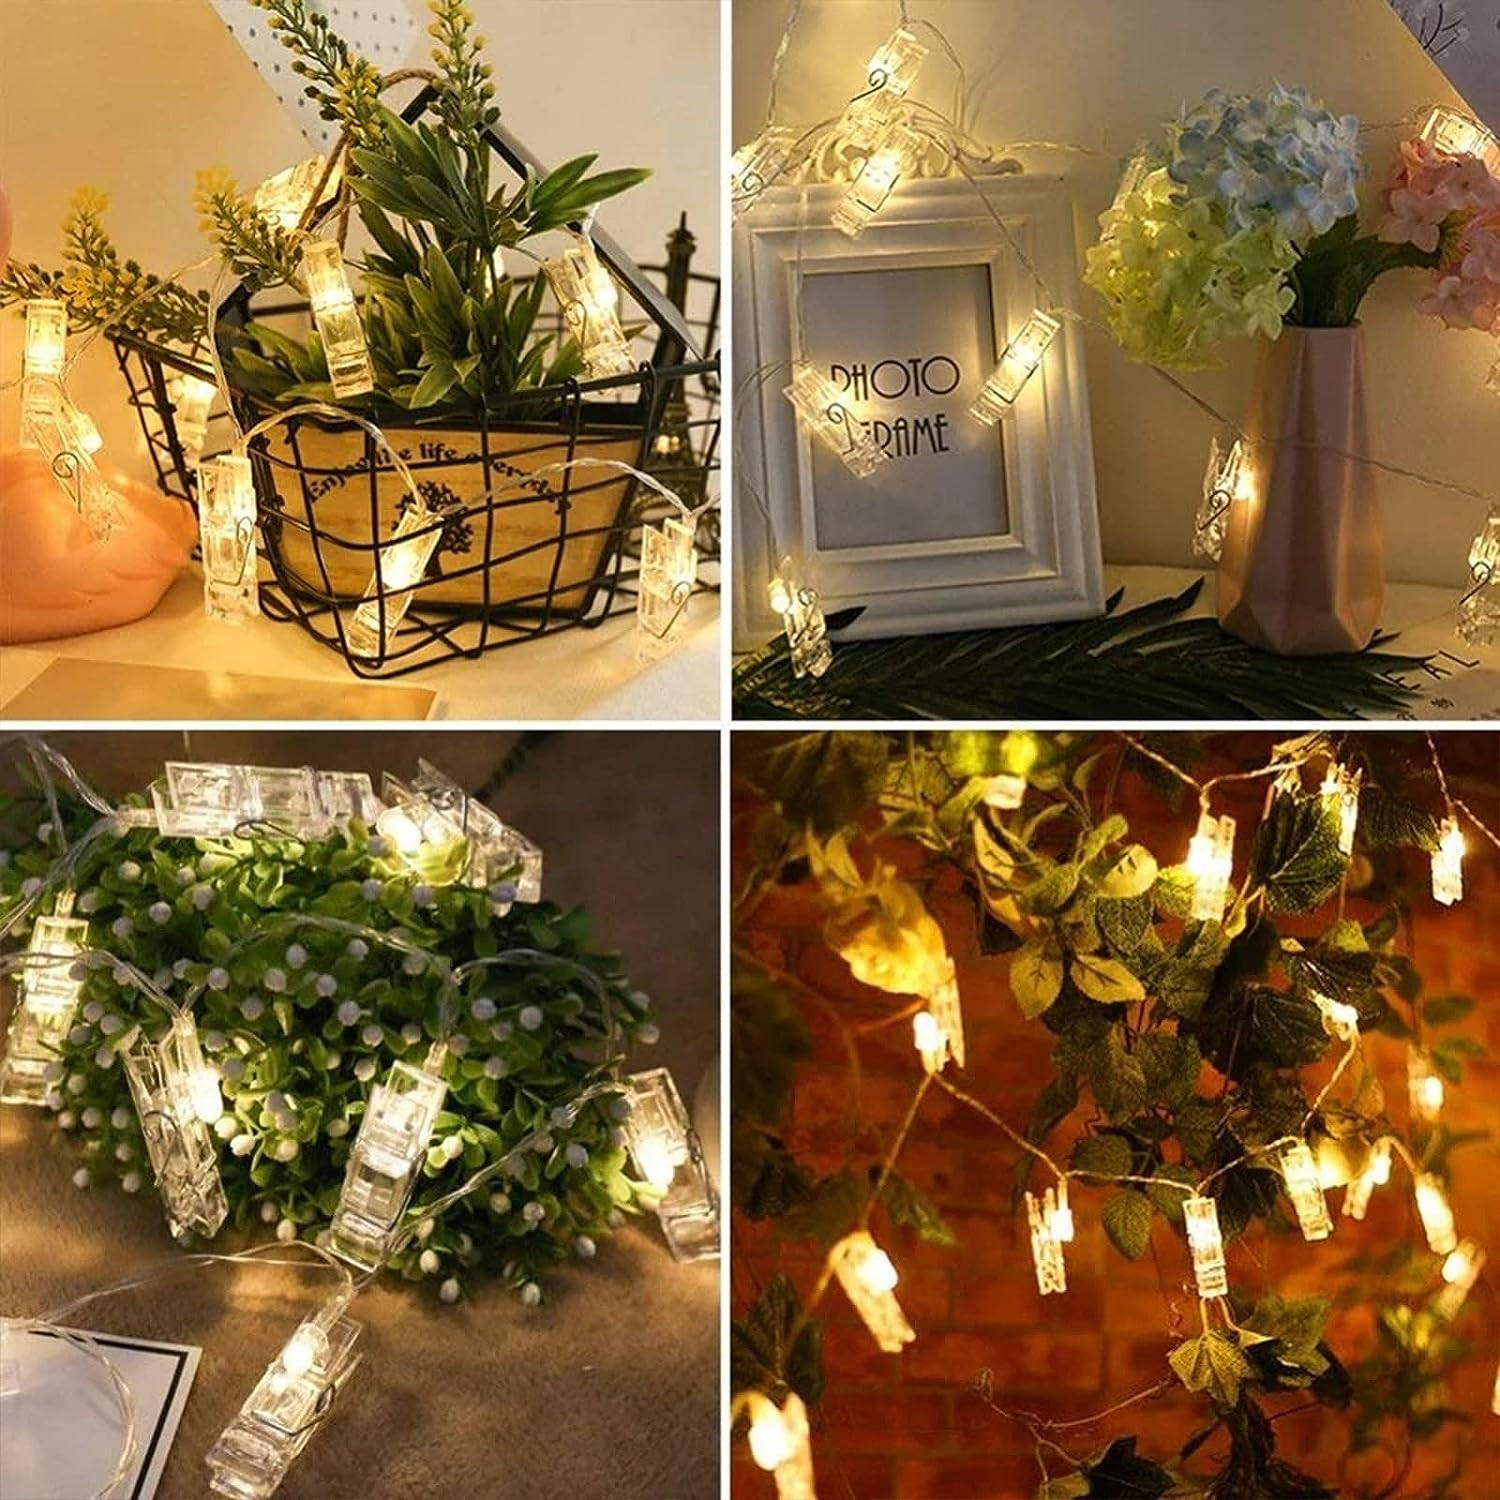 Kuber Industries LED String Lights | 20 Photo Clip String Lights for Hanging Birthday Photo | Festival | Wedding | Home Decoration | LED Clip Lights | Warm White